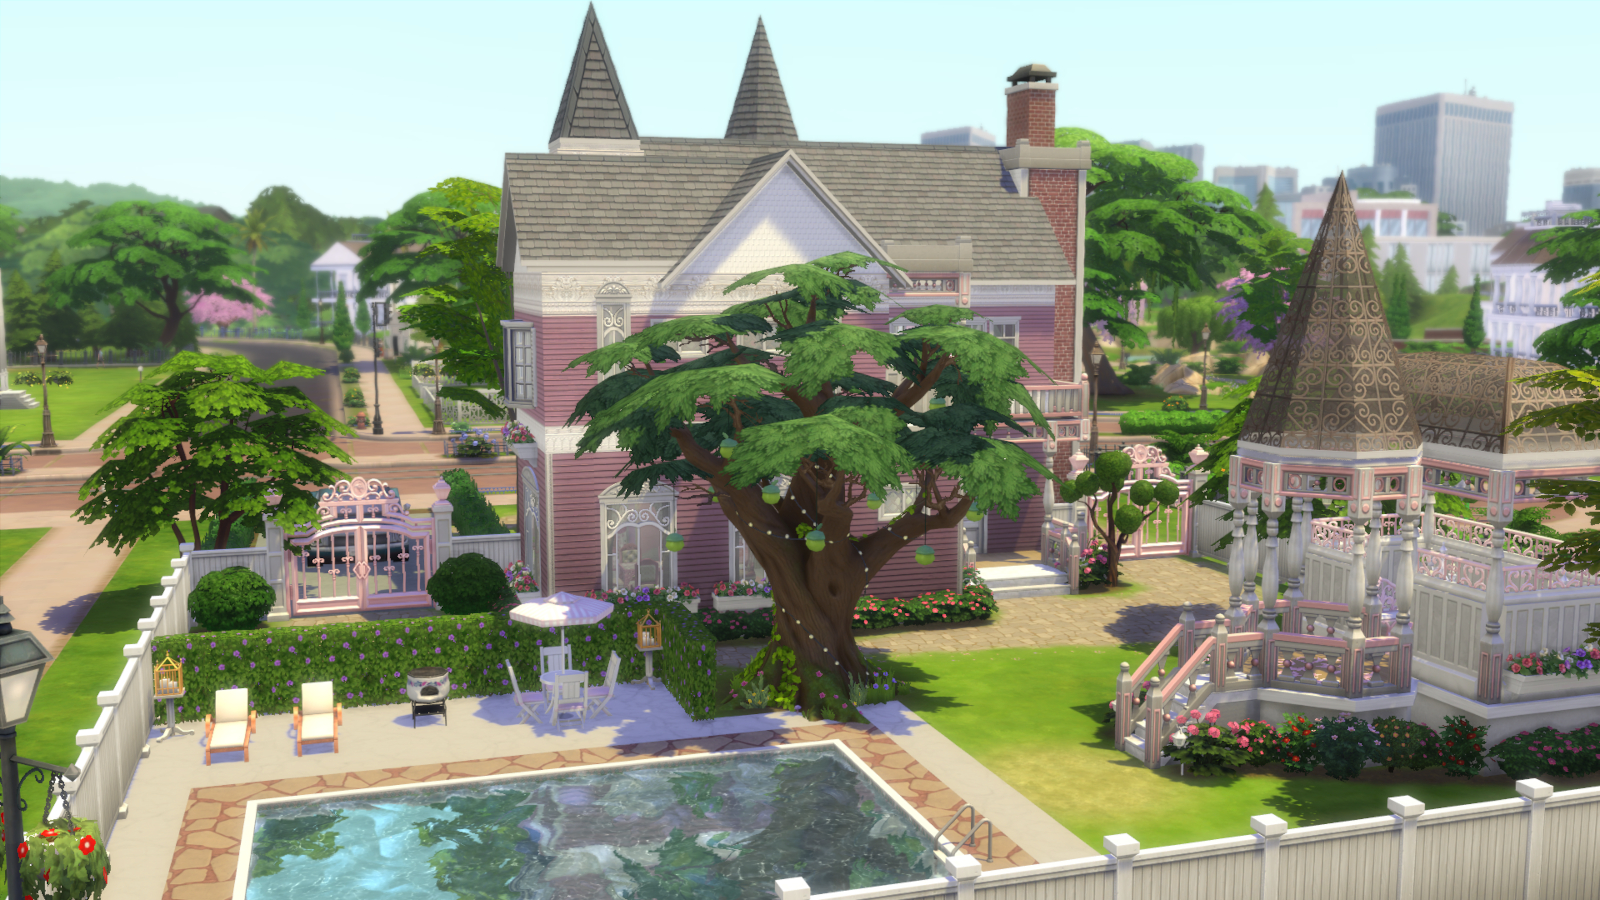 Romantic Rose Victorian DV - The Sims 4 Rooms / Lots - CurseForge